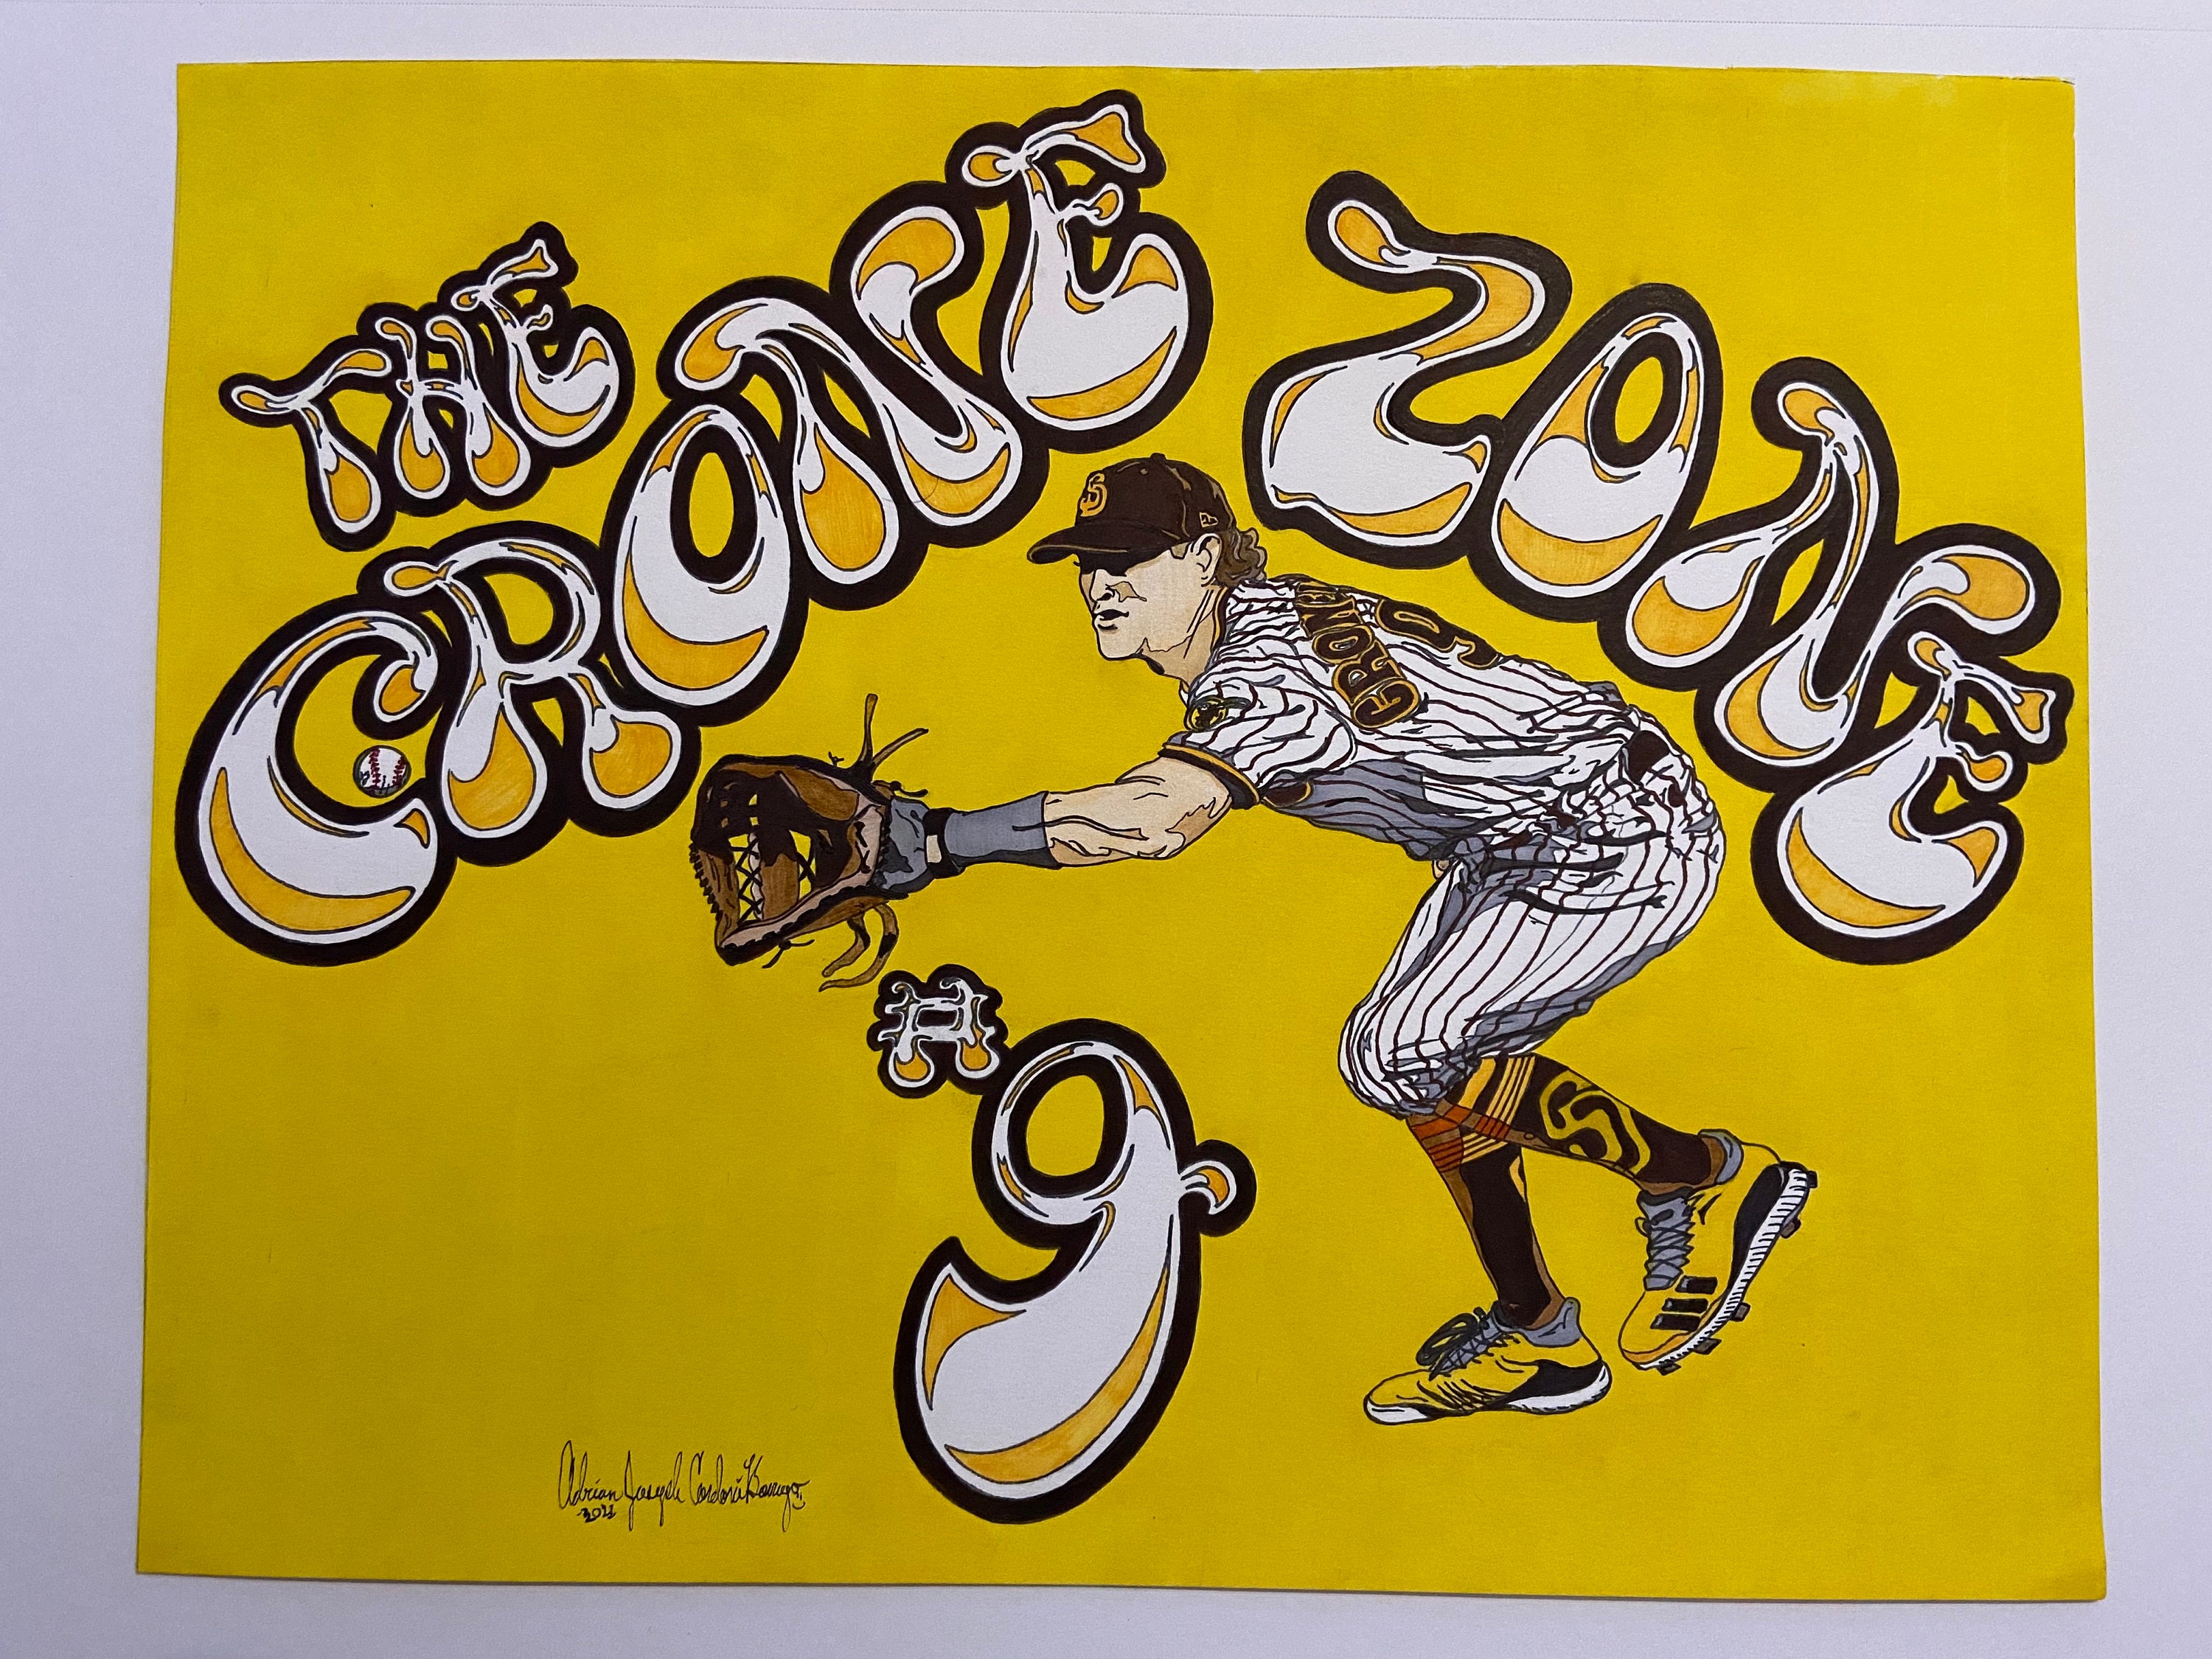 The Crone Zone has one more (All)Star - San Diego Padres